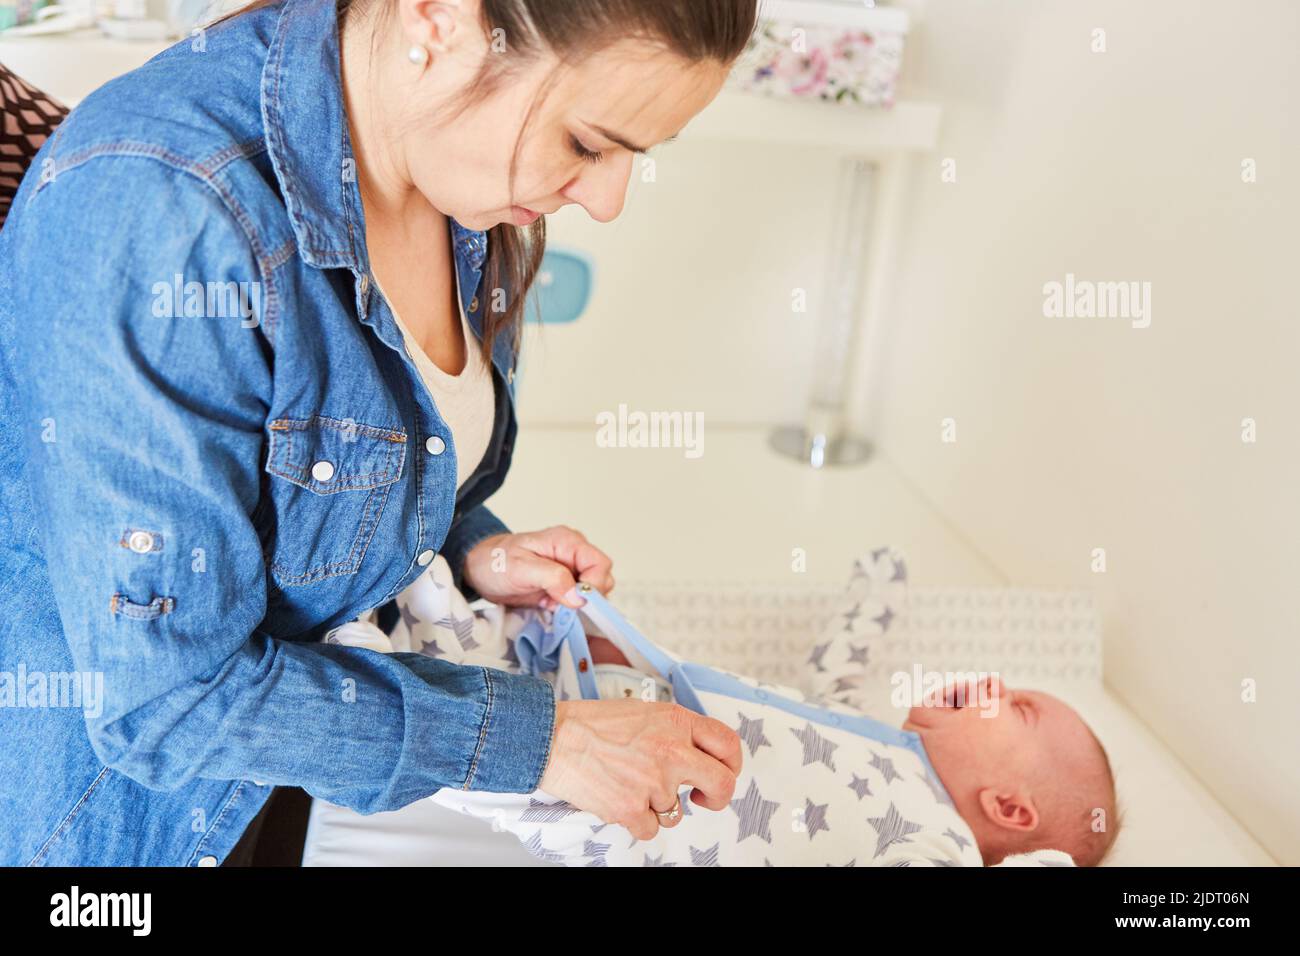 Caring mother changing diaper at her baby on changing table at home Stock Photo